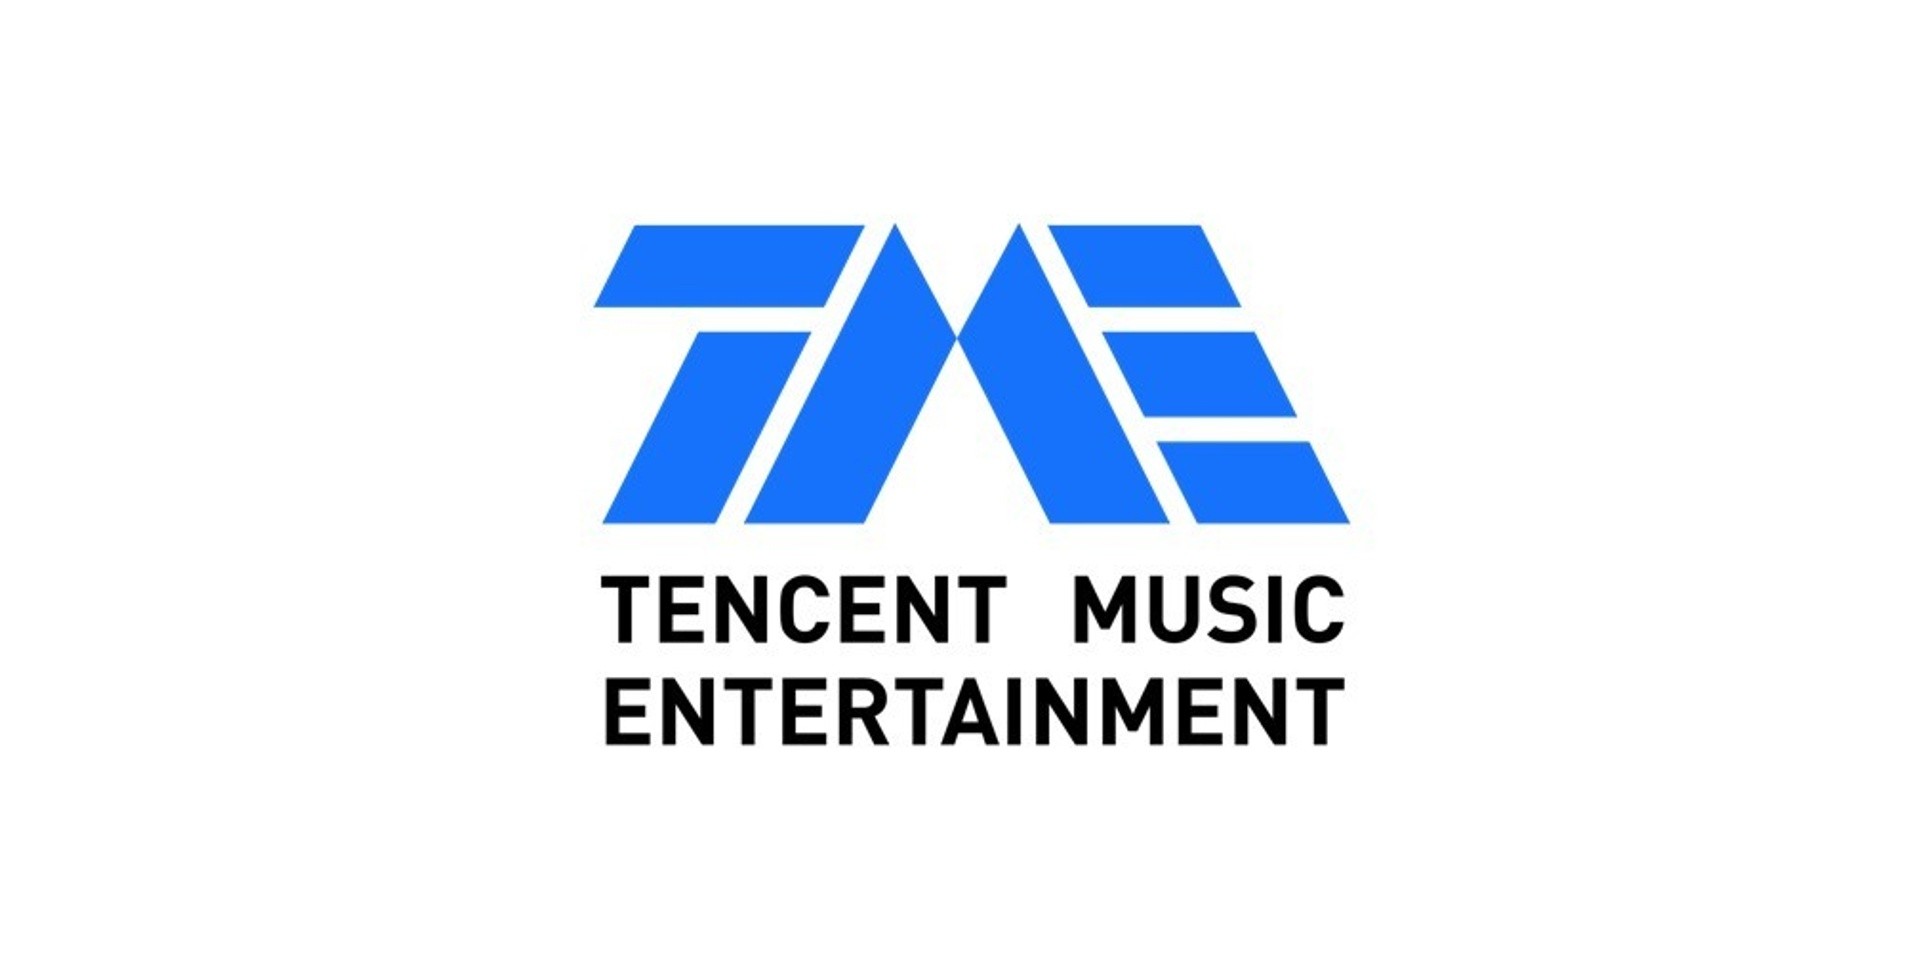 Tencent brings impressive catalogue of Chinese music to Apple Music users worldwide